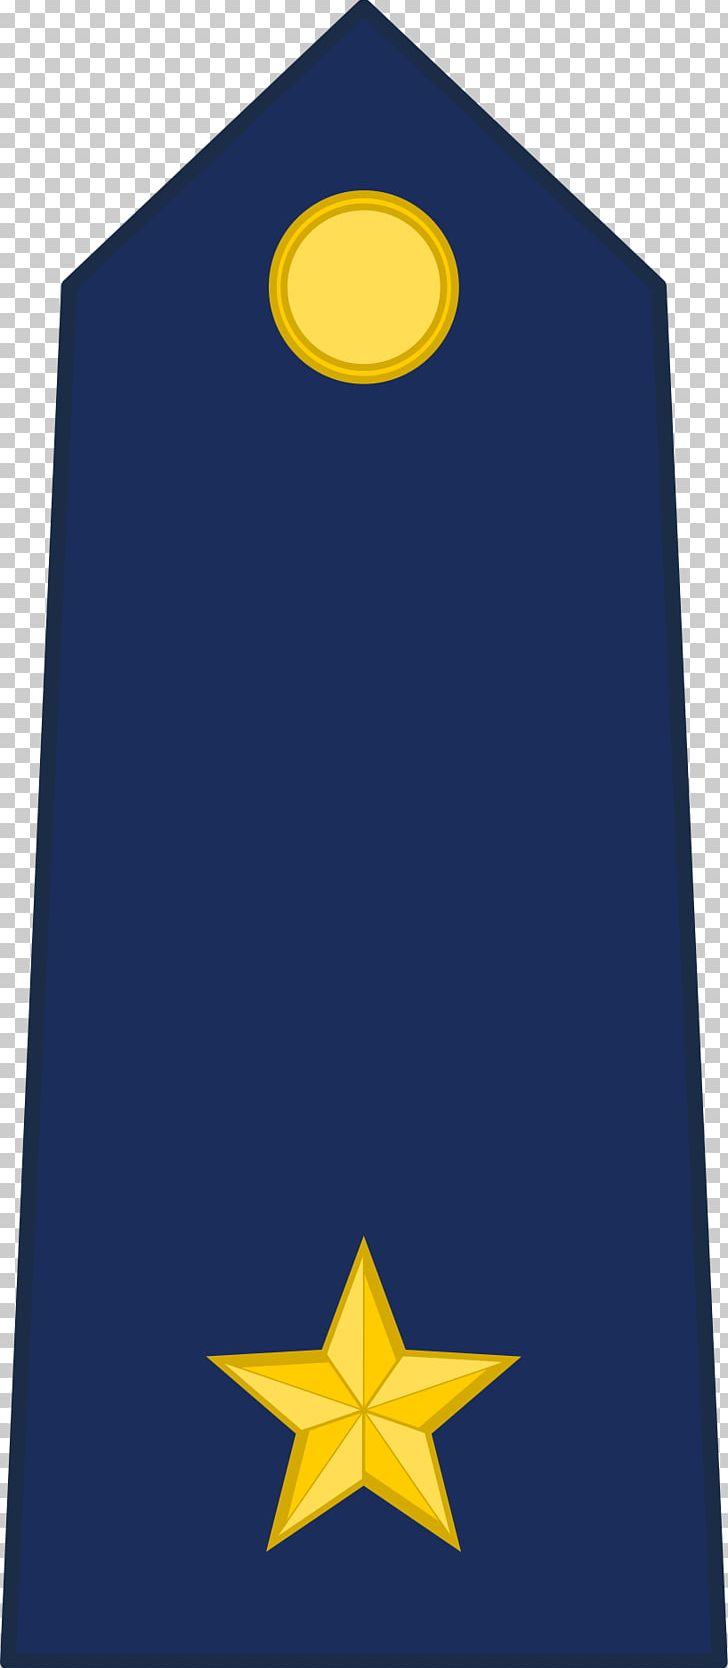 Military Rank Starshy Praporshchik Slovakia Slovak Armed Forces PNG, Clipart, Angkatan Bersenjata, Blue, Cobalt Blue, Electric Blue, Hierarchy Free PNG Download